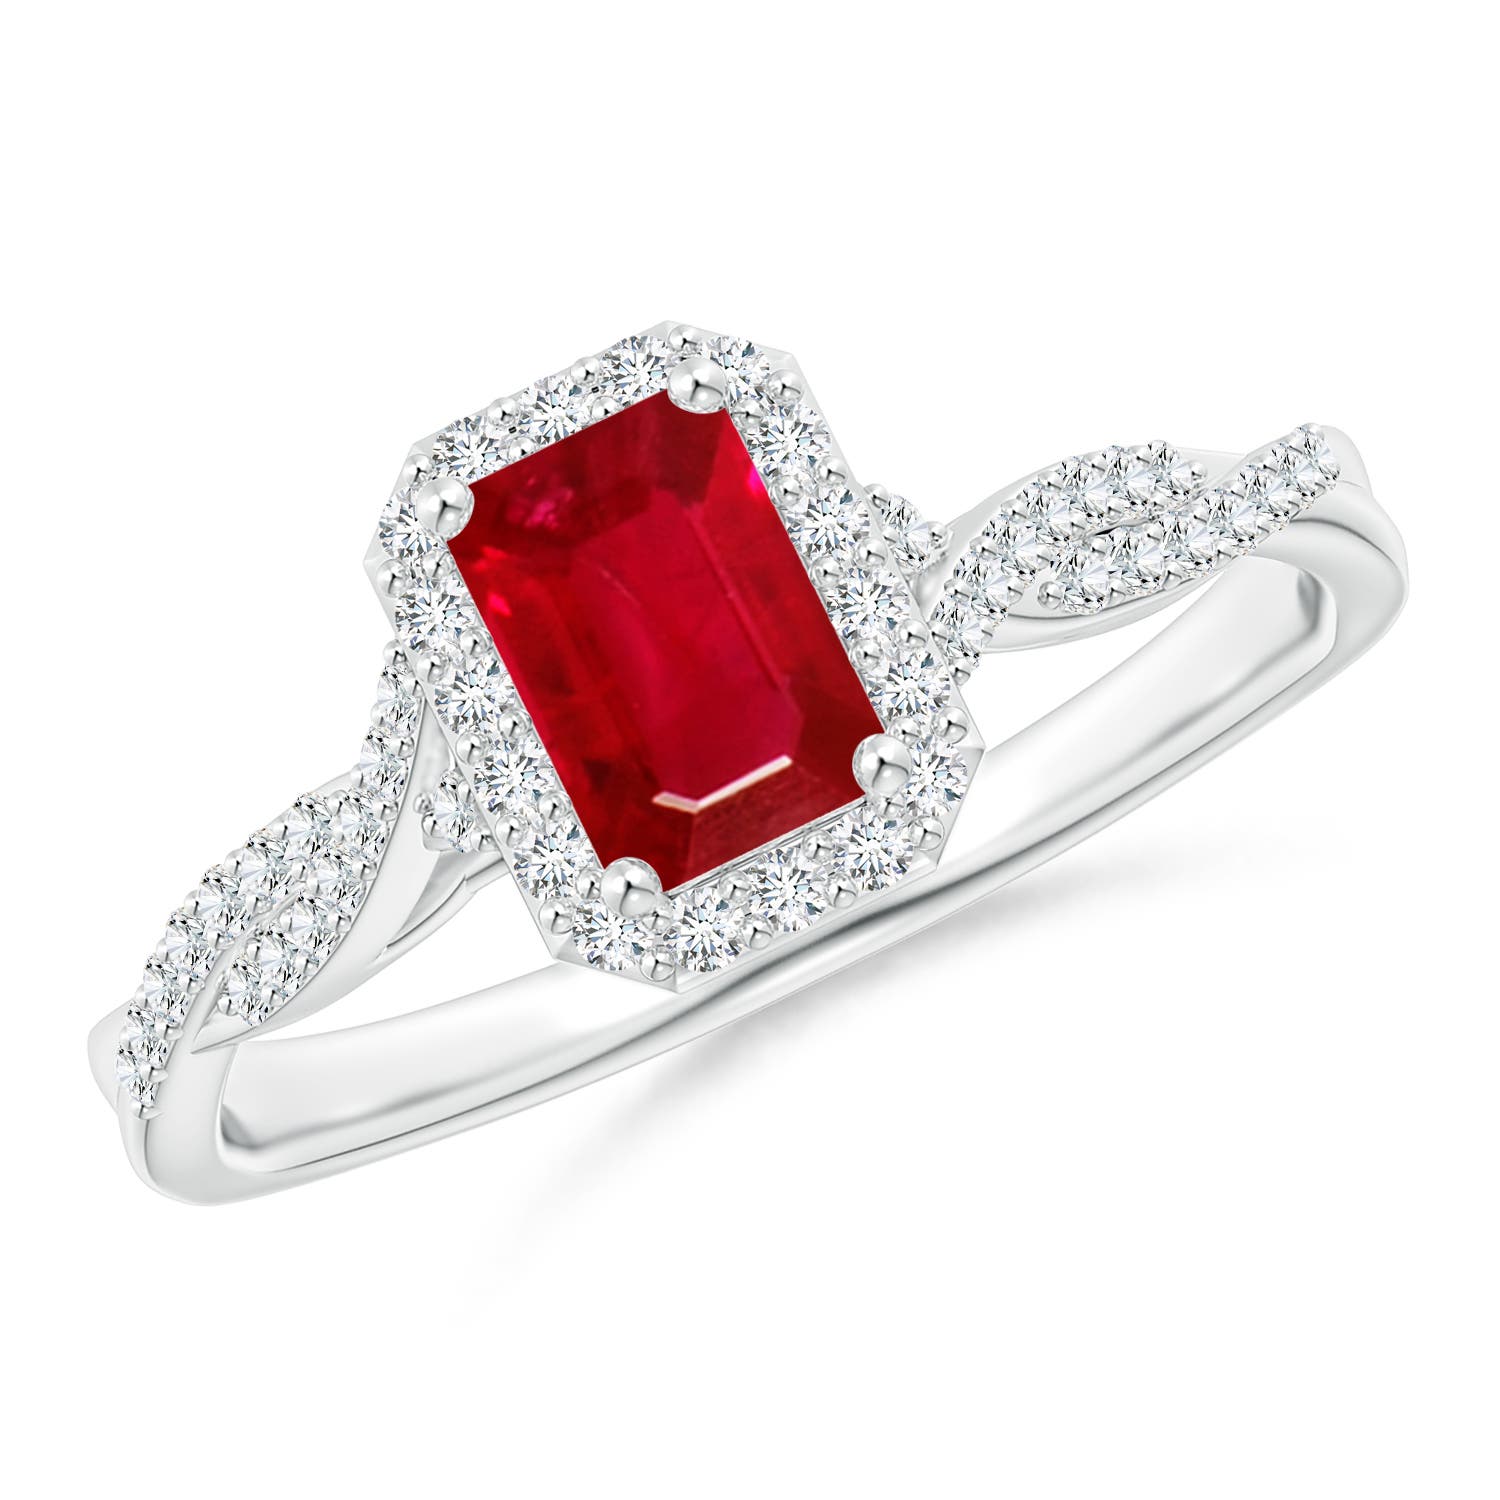 23 Red Gemstones: Which are Best for Rings? - International Gem Society